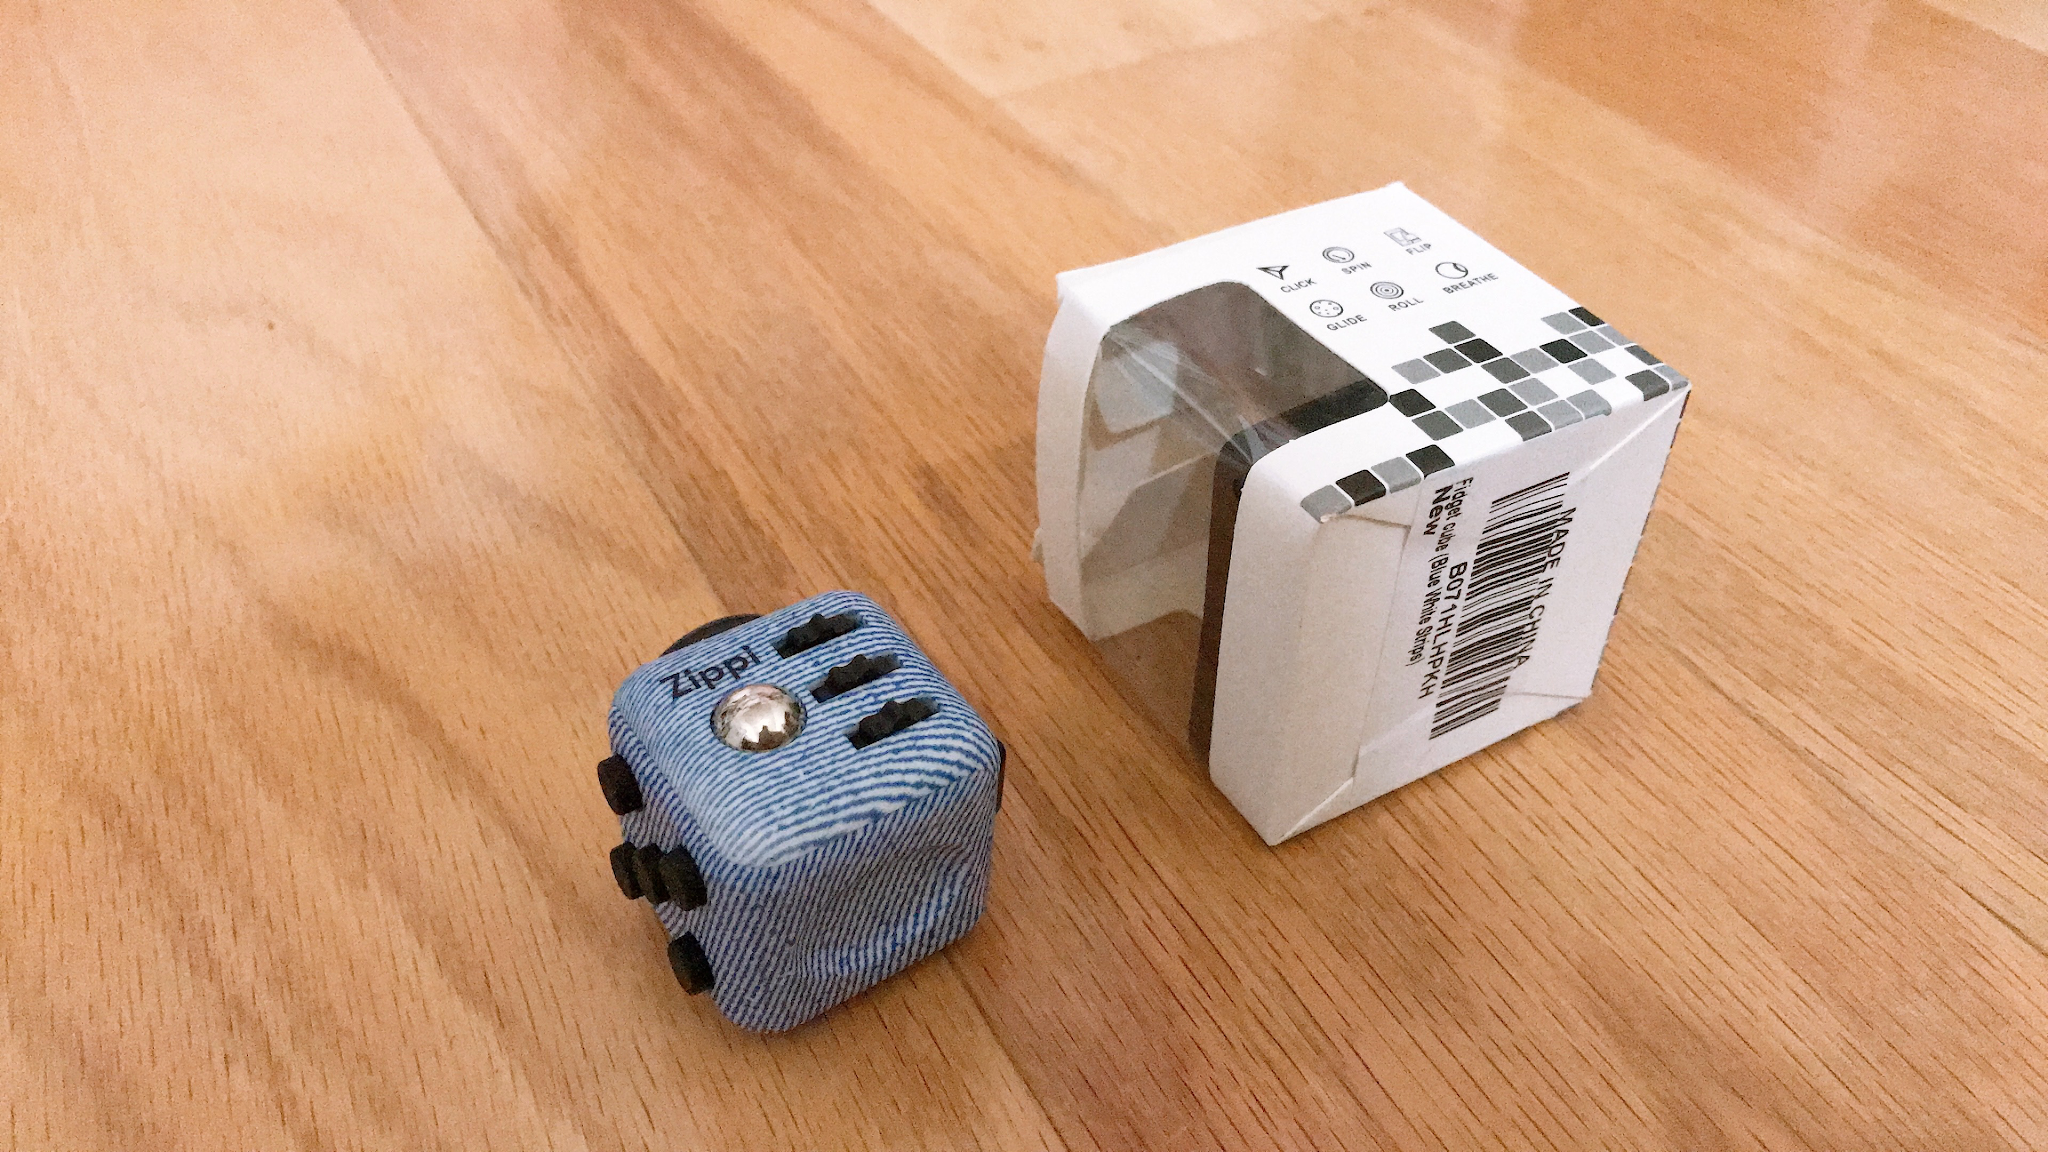 The Coolest Toy Ever!!!, Fidget Cube by Chuchik Toys, (Gifted)*